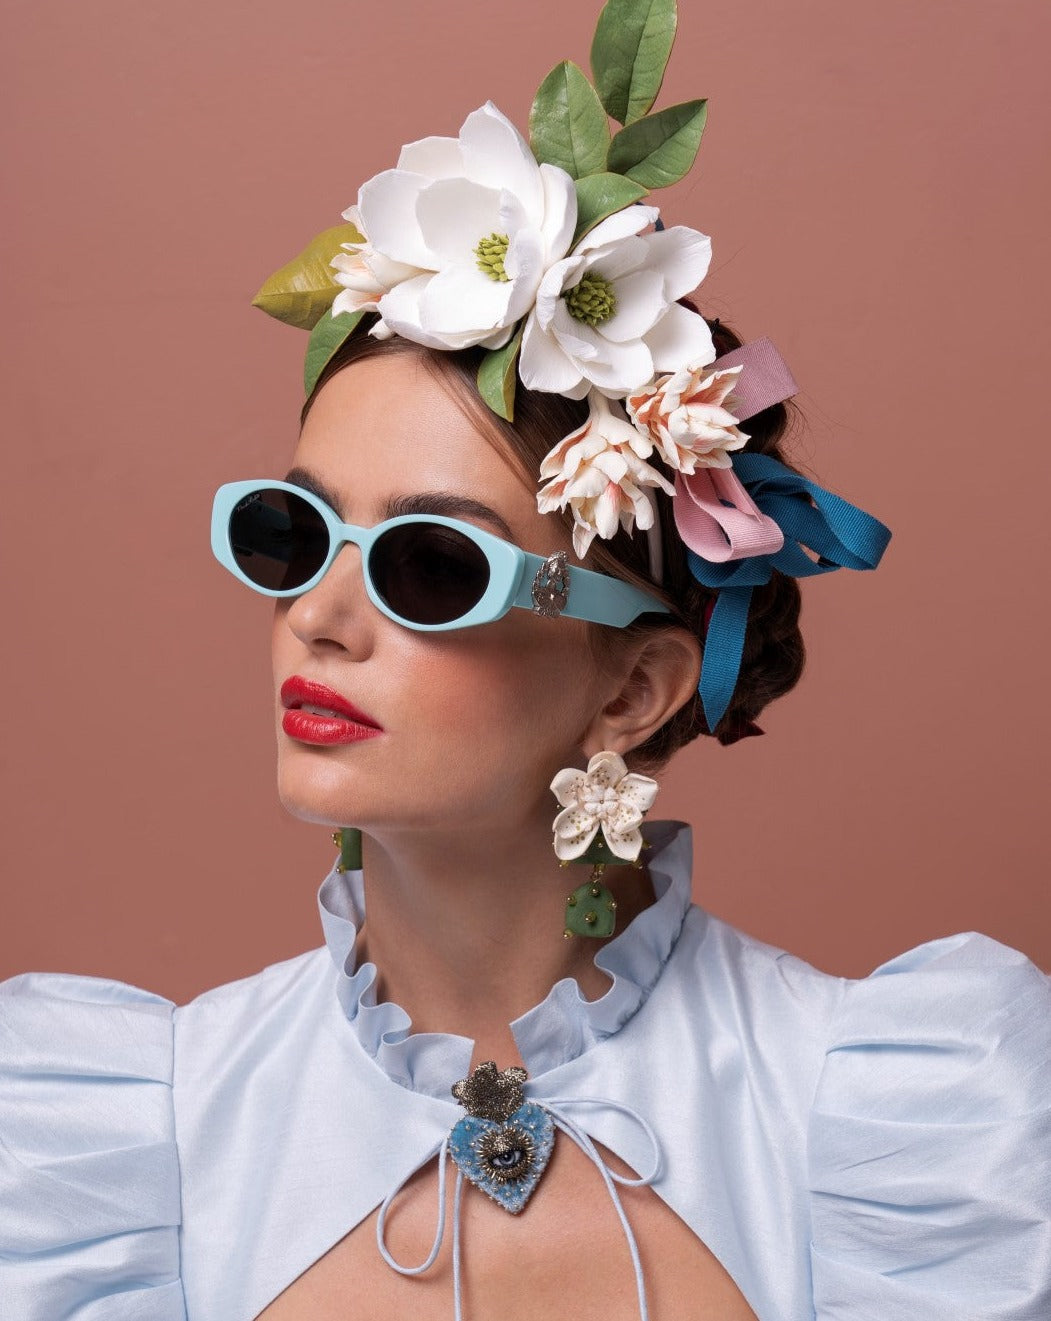 A woman wearing Frida Portrait sunglasses by For Art's Sake® with ultra-lightweight nylon lenses and a light blue dress with a ruffled neckline. She has red lipstick and is adorned with a large floral headpiece and dangling earrings. The backdrop is a warm, muted shade of pink.